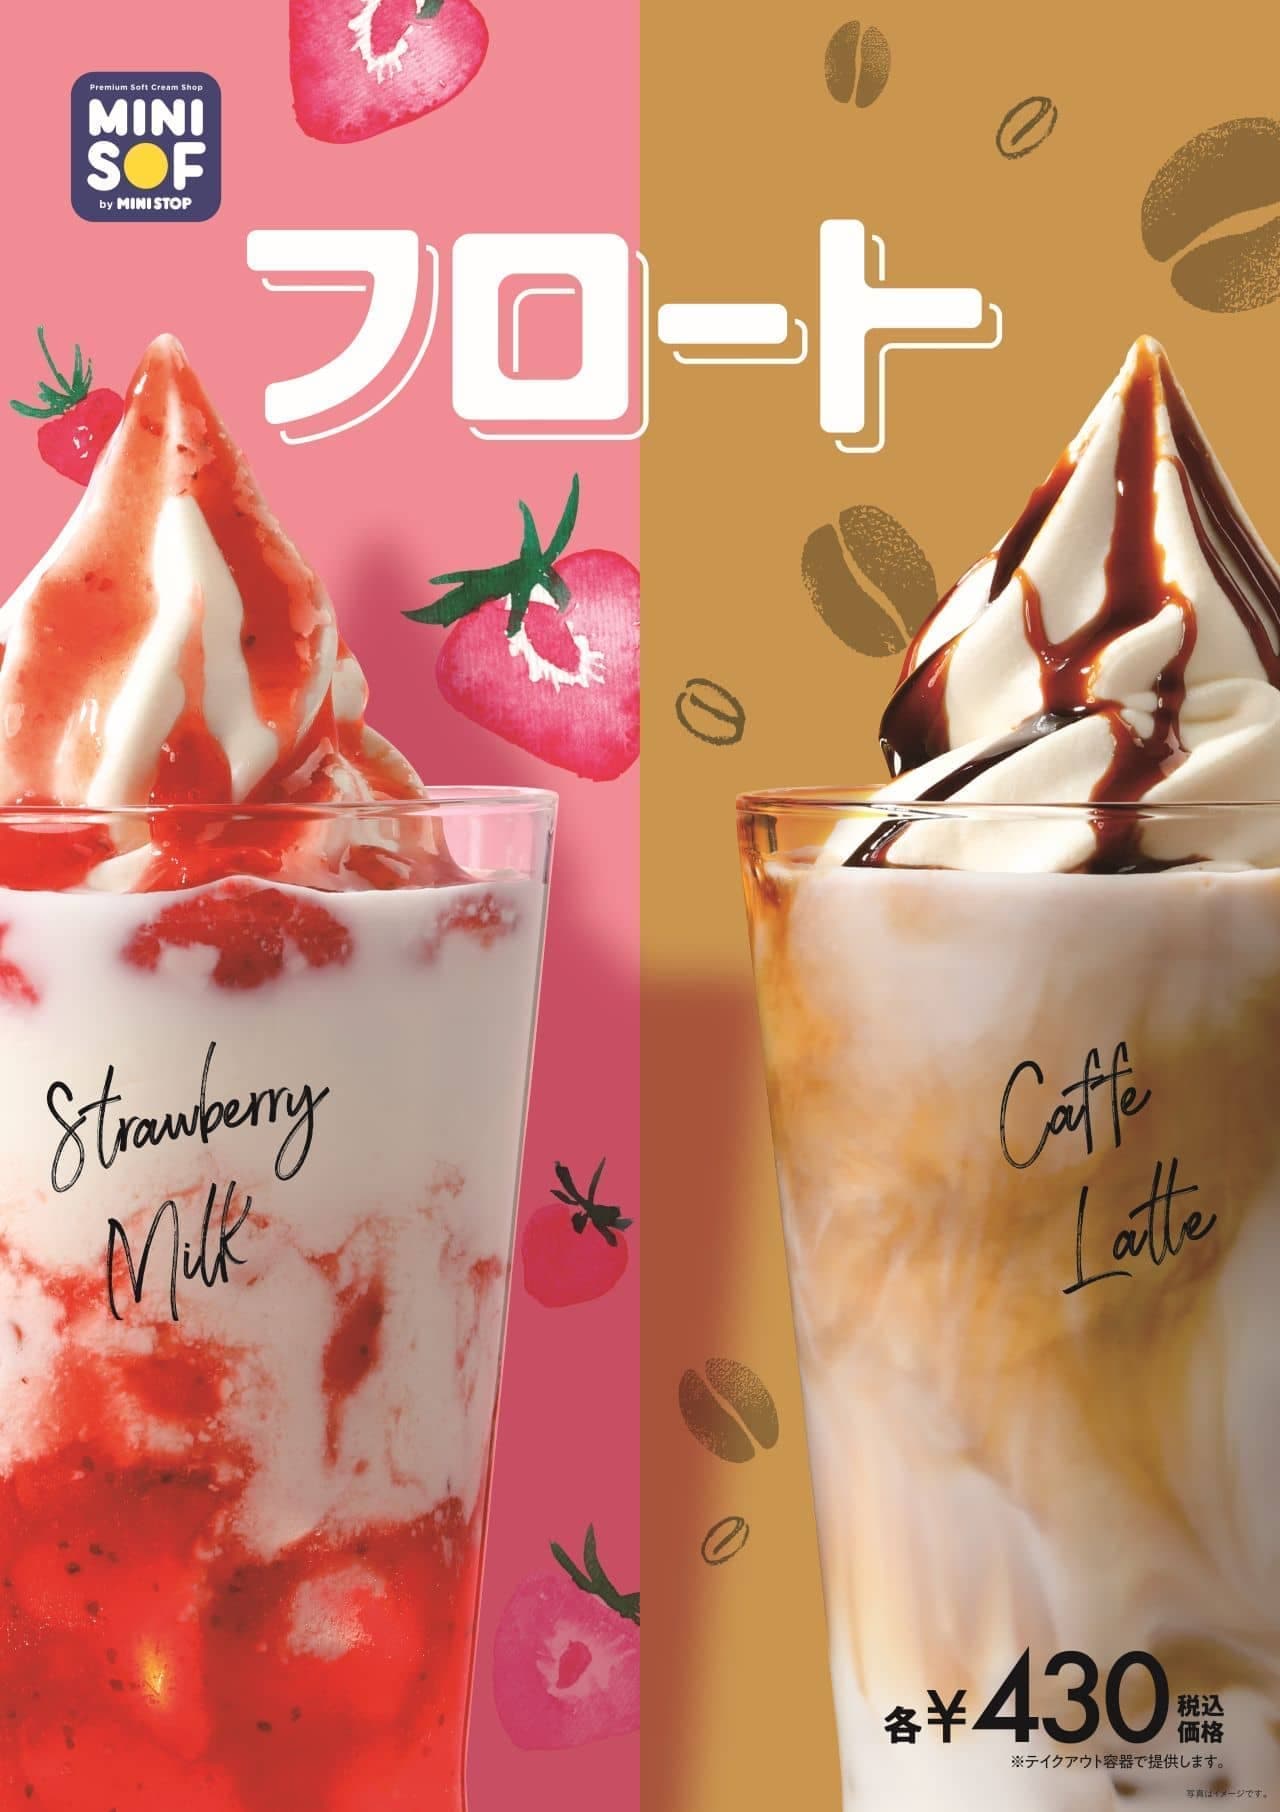 Mini soft "Strawberry Milk Float" and "Cafe Latte Float".